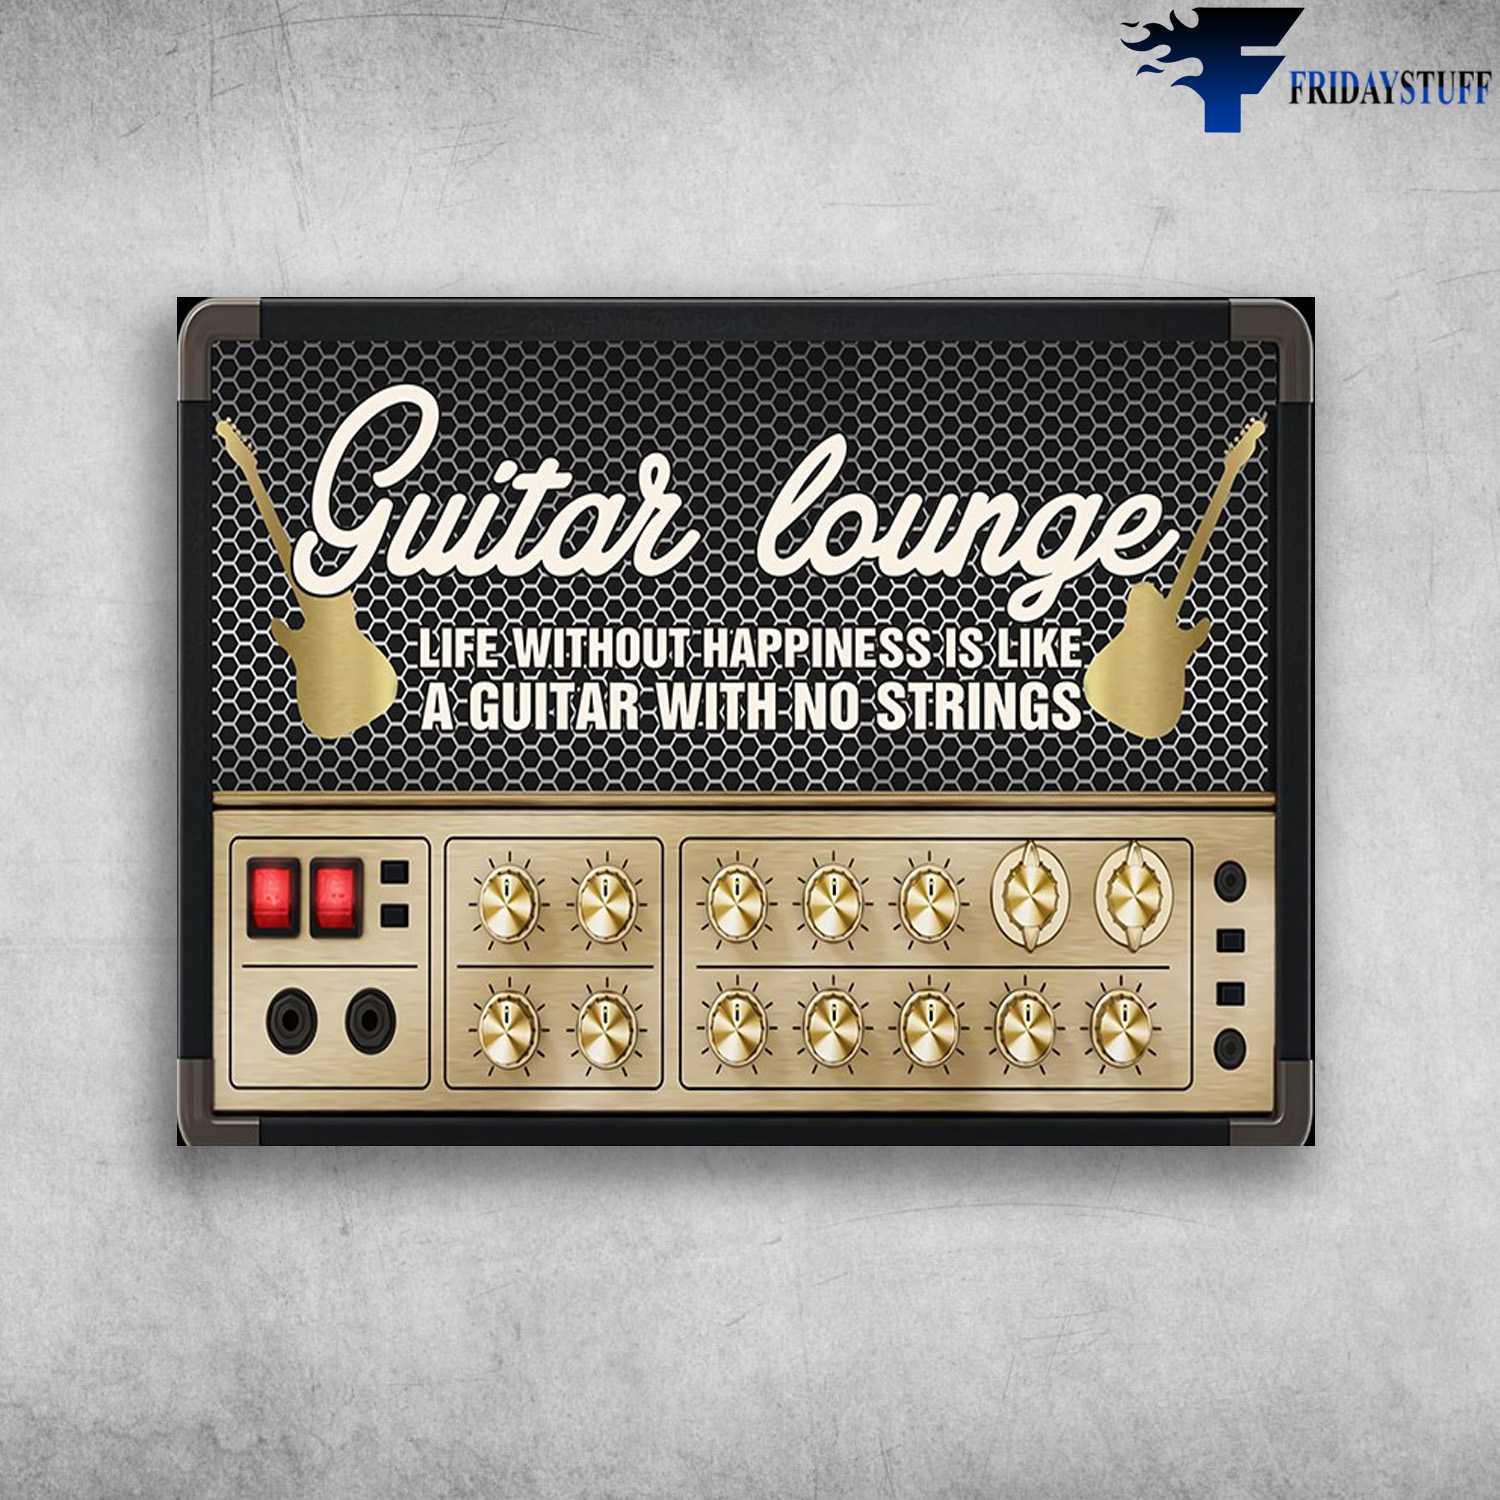 Guitar Lounge, Life Without Happiness Is Like, A Guitar With No Strings